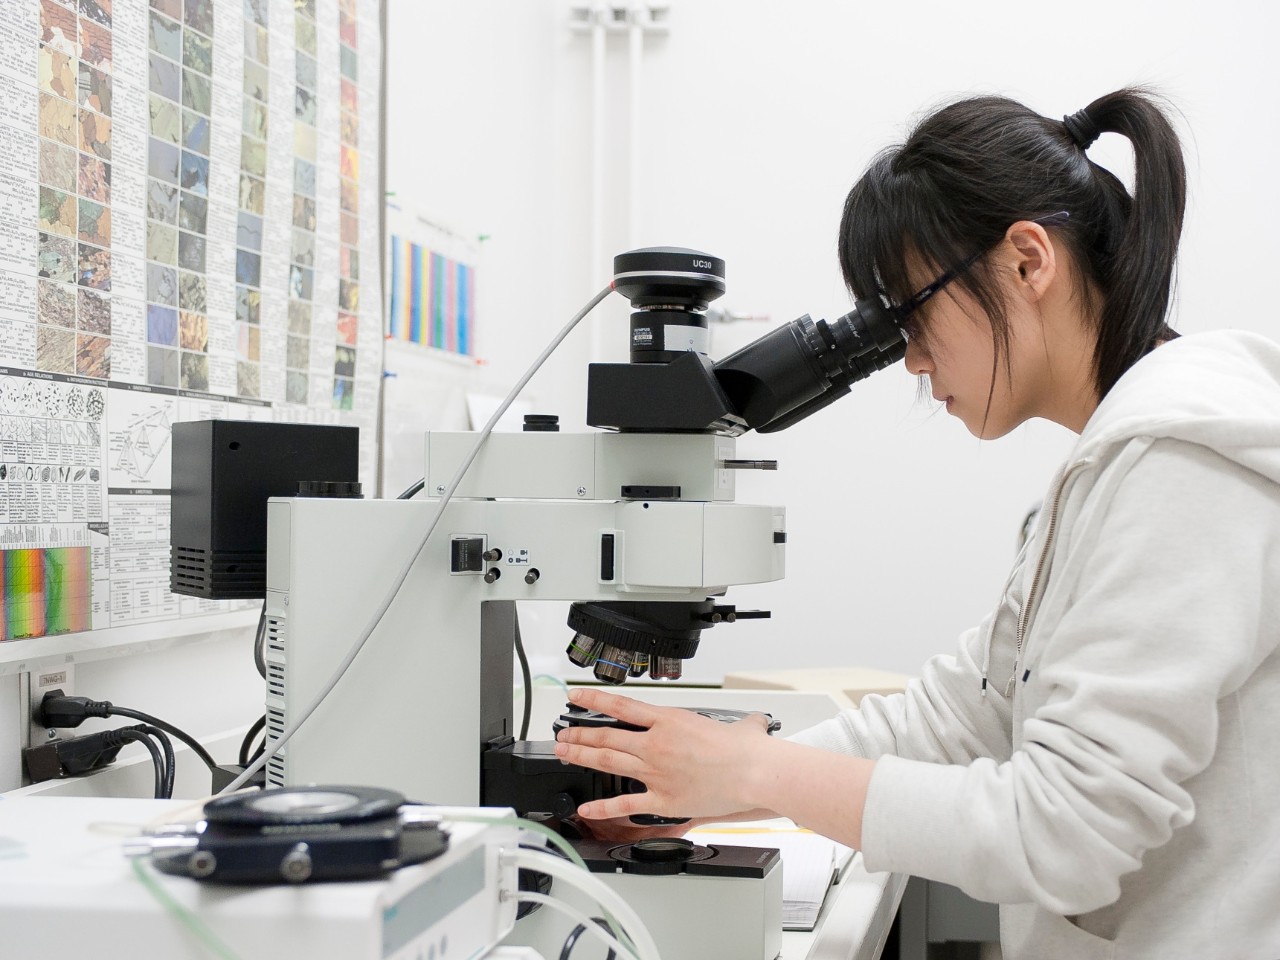 Faculties and Equipment, girl working at lab microscope